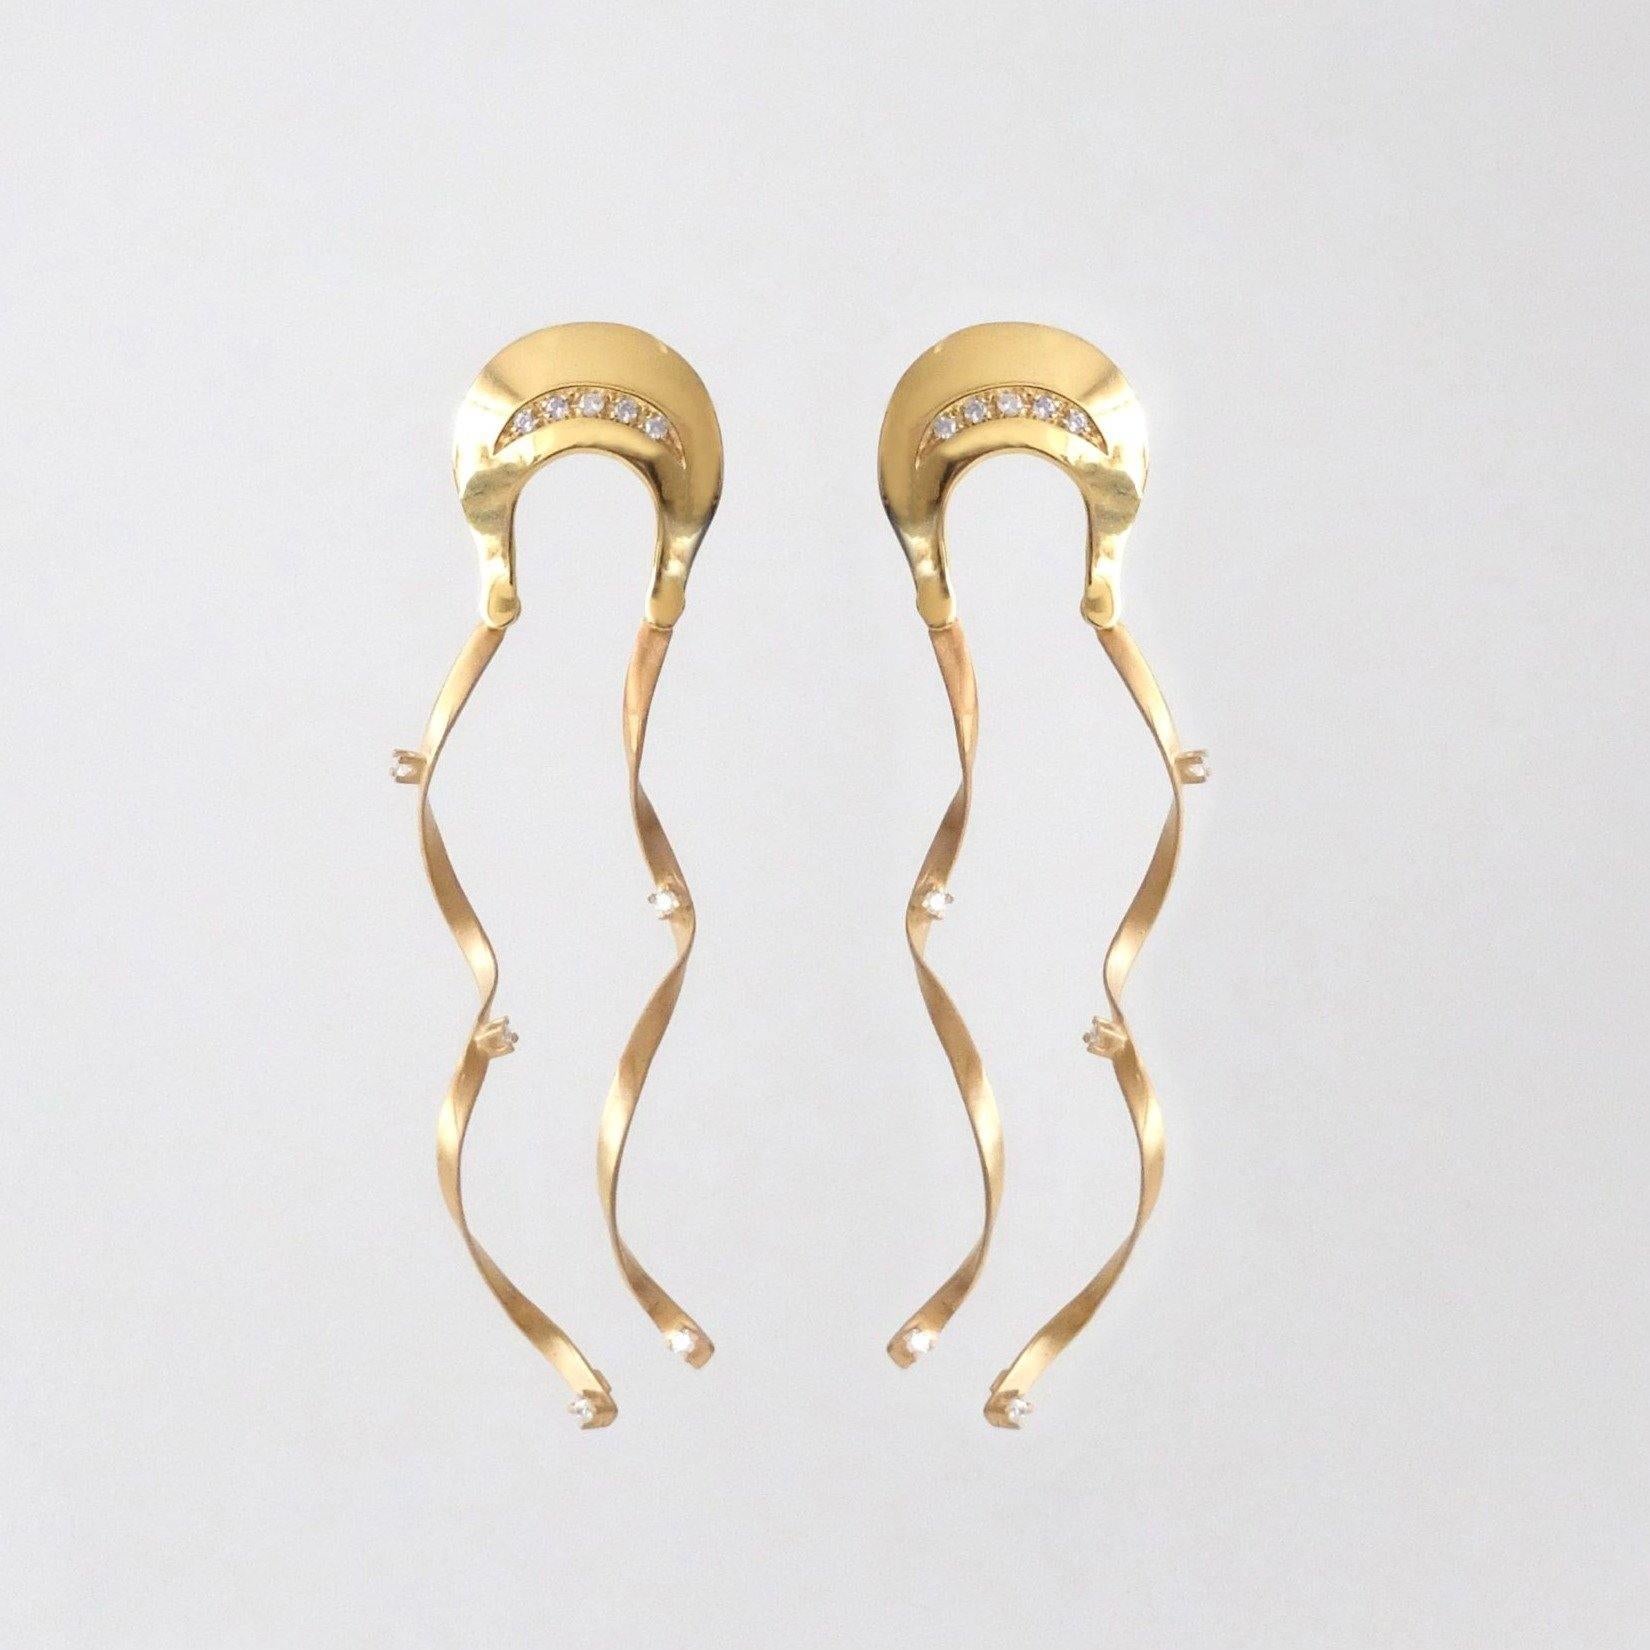 Modern Earrings 925 CZ silver, 18 kt. gold plated, made in Italy, Méduse For Sale